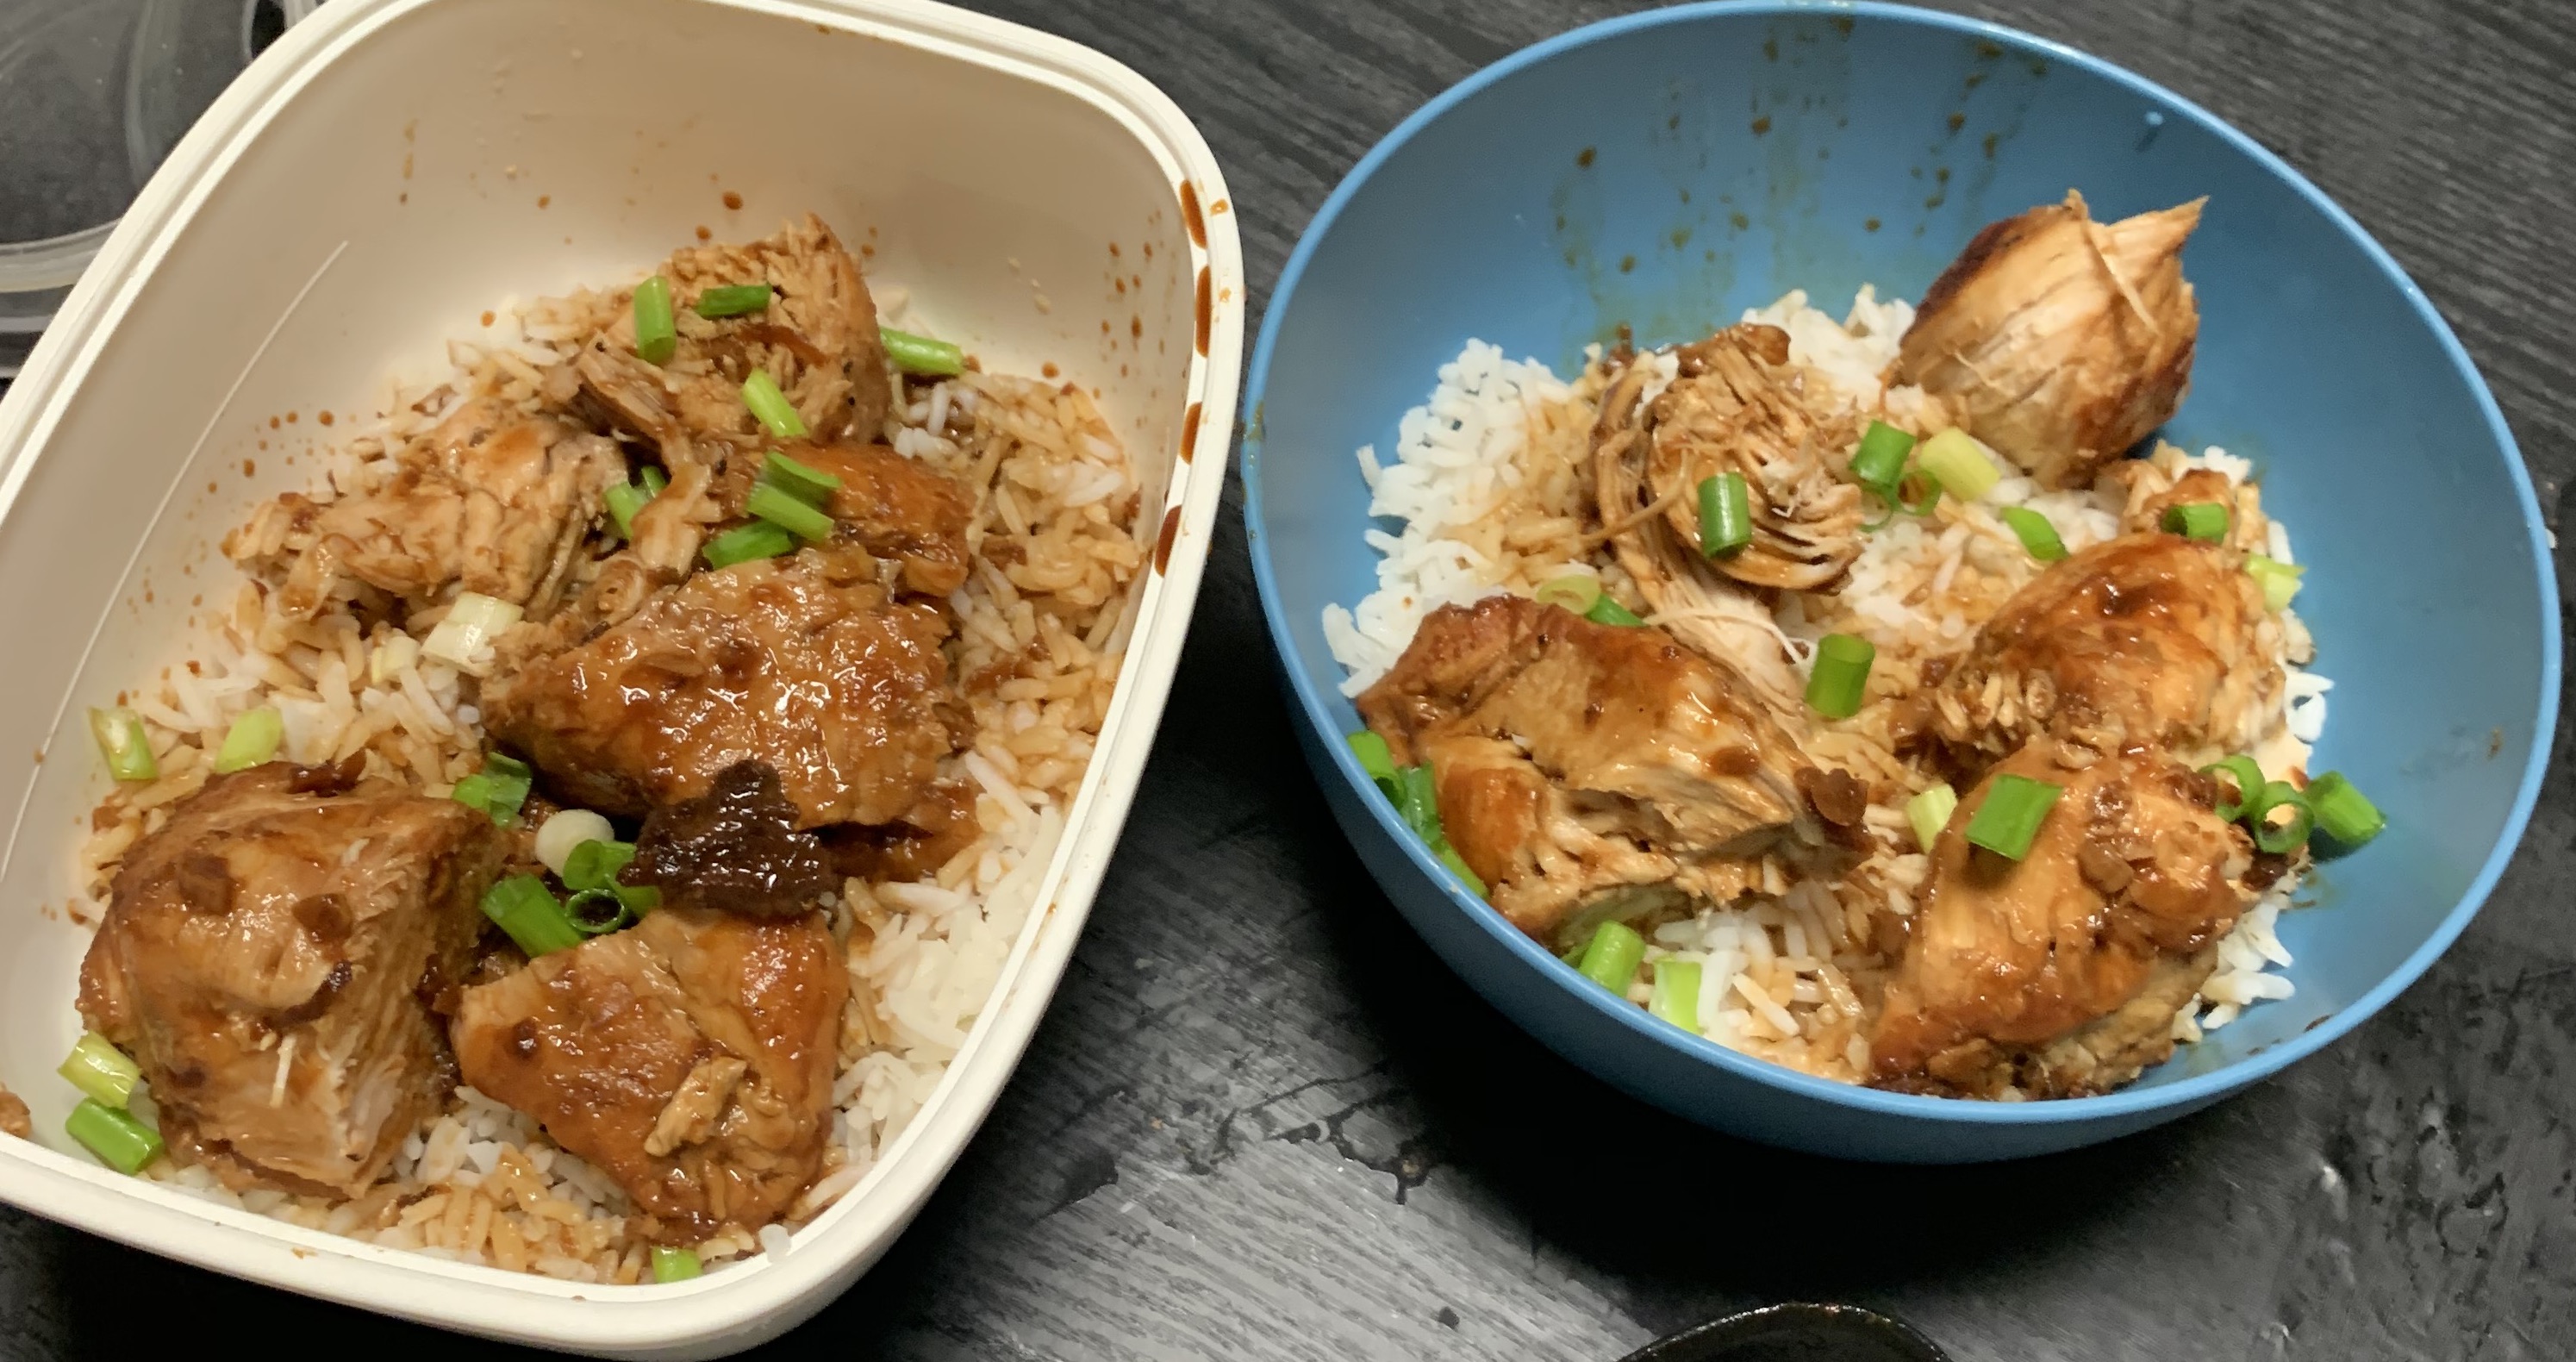 Breasts with sauce over rice garnished with green onions